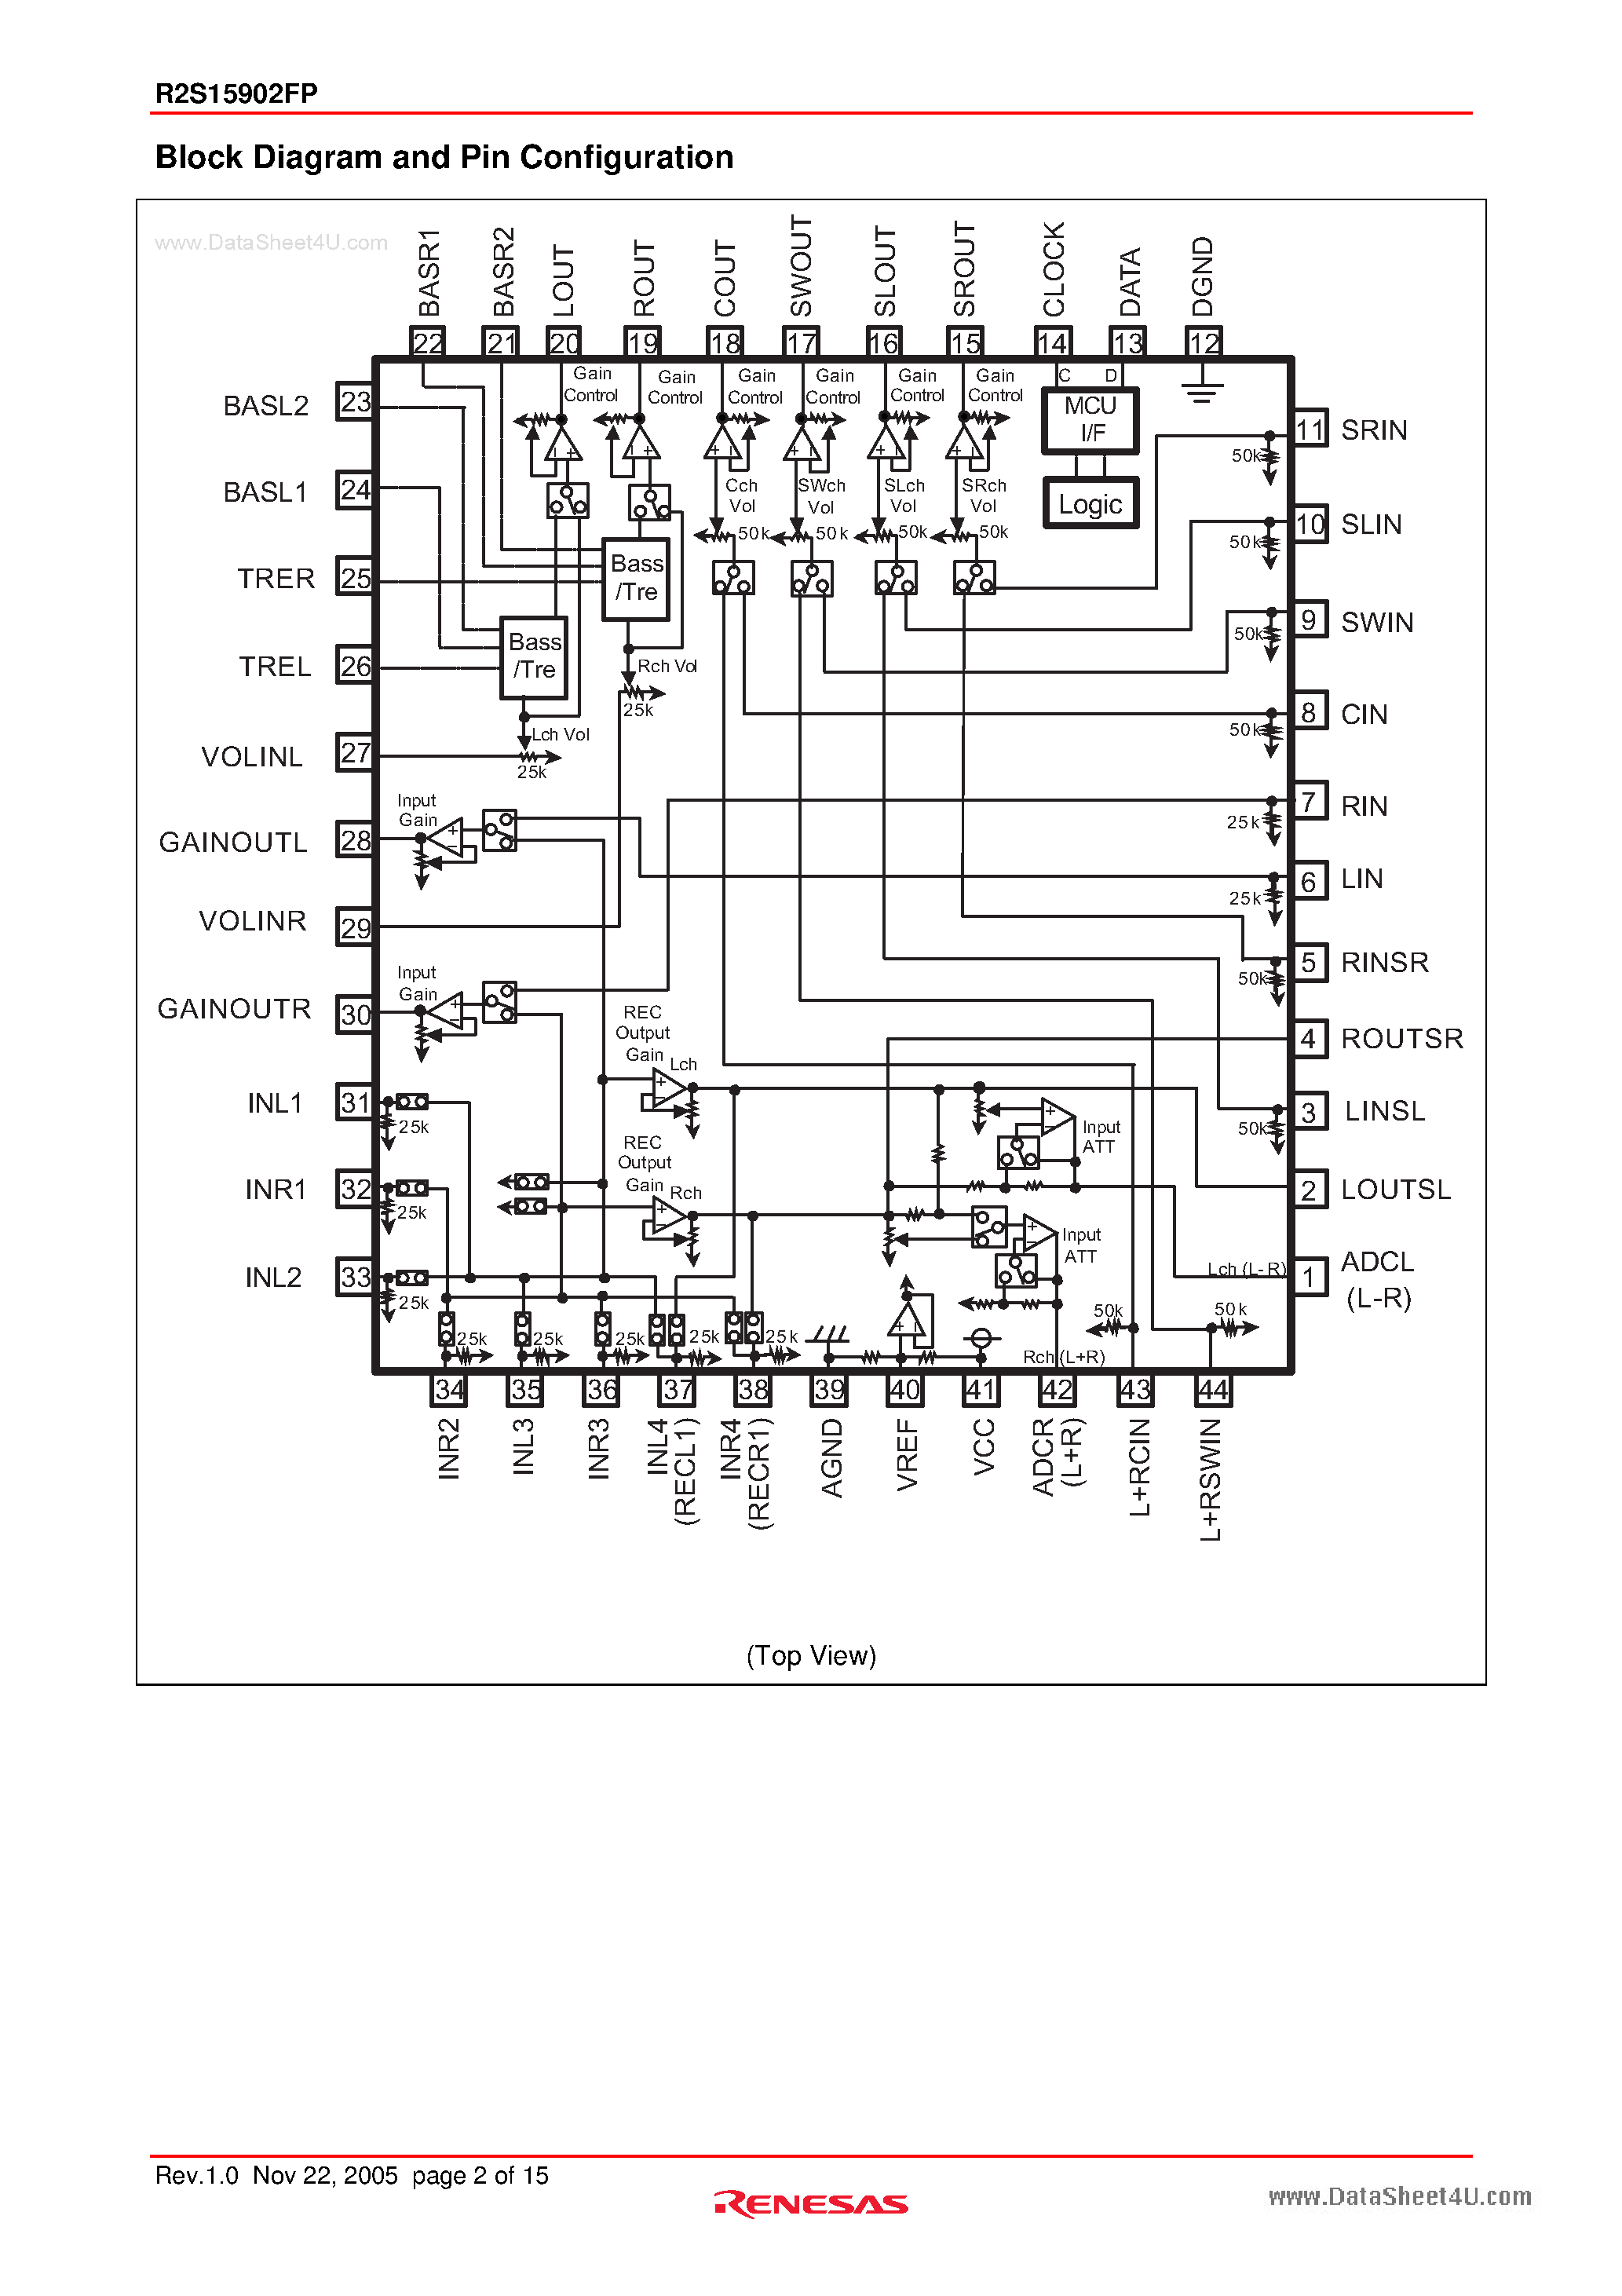 Datasheet 2S15902FP - 6ch Electronic Volume page 2